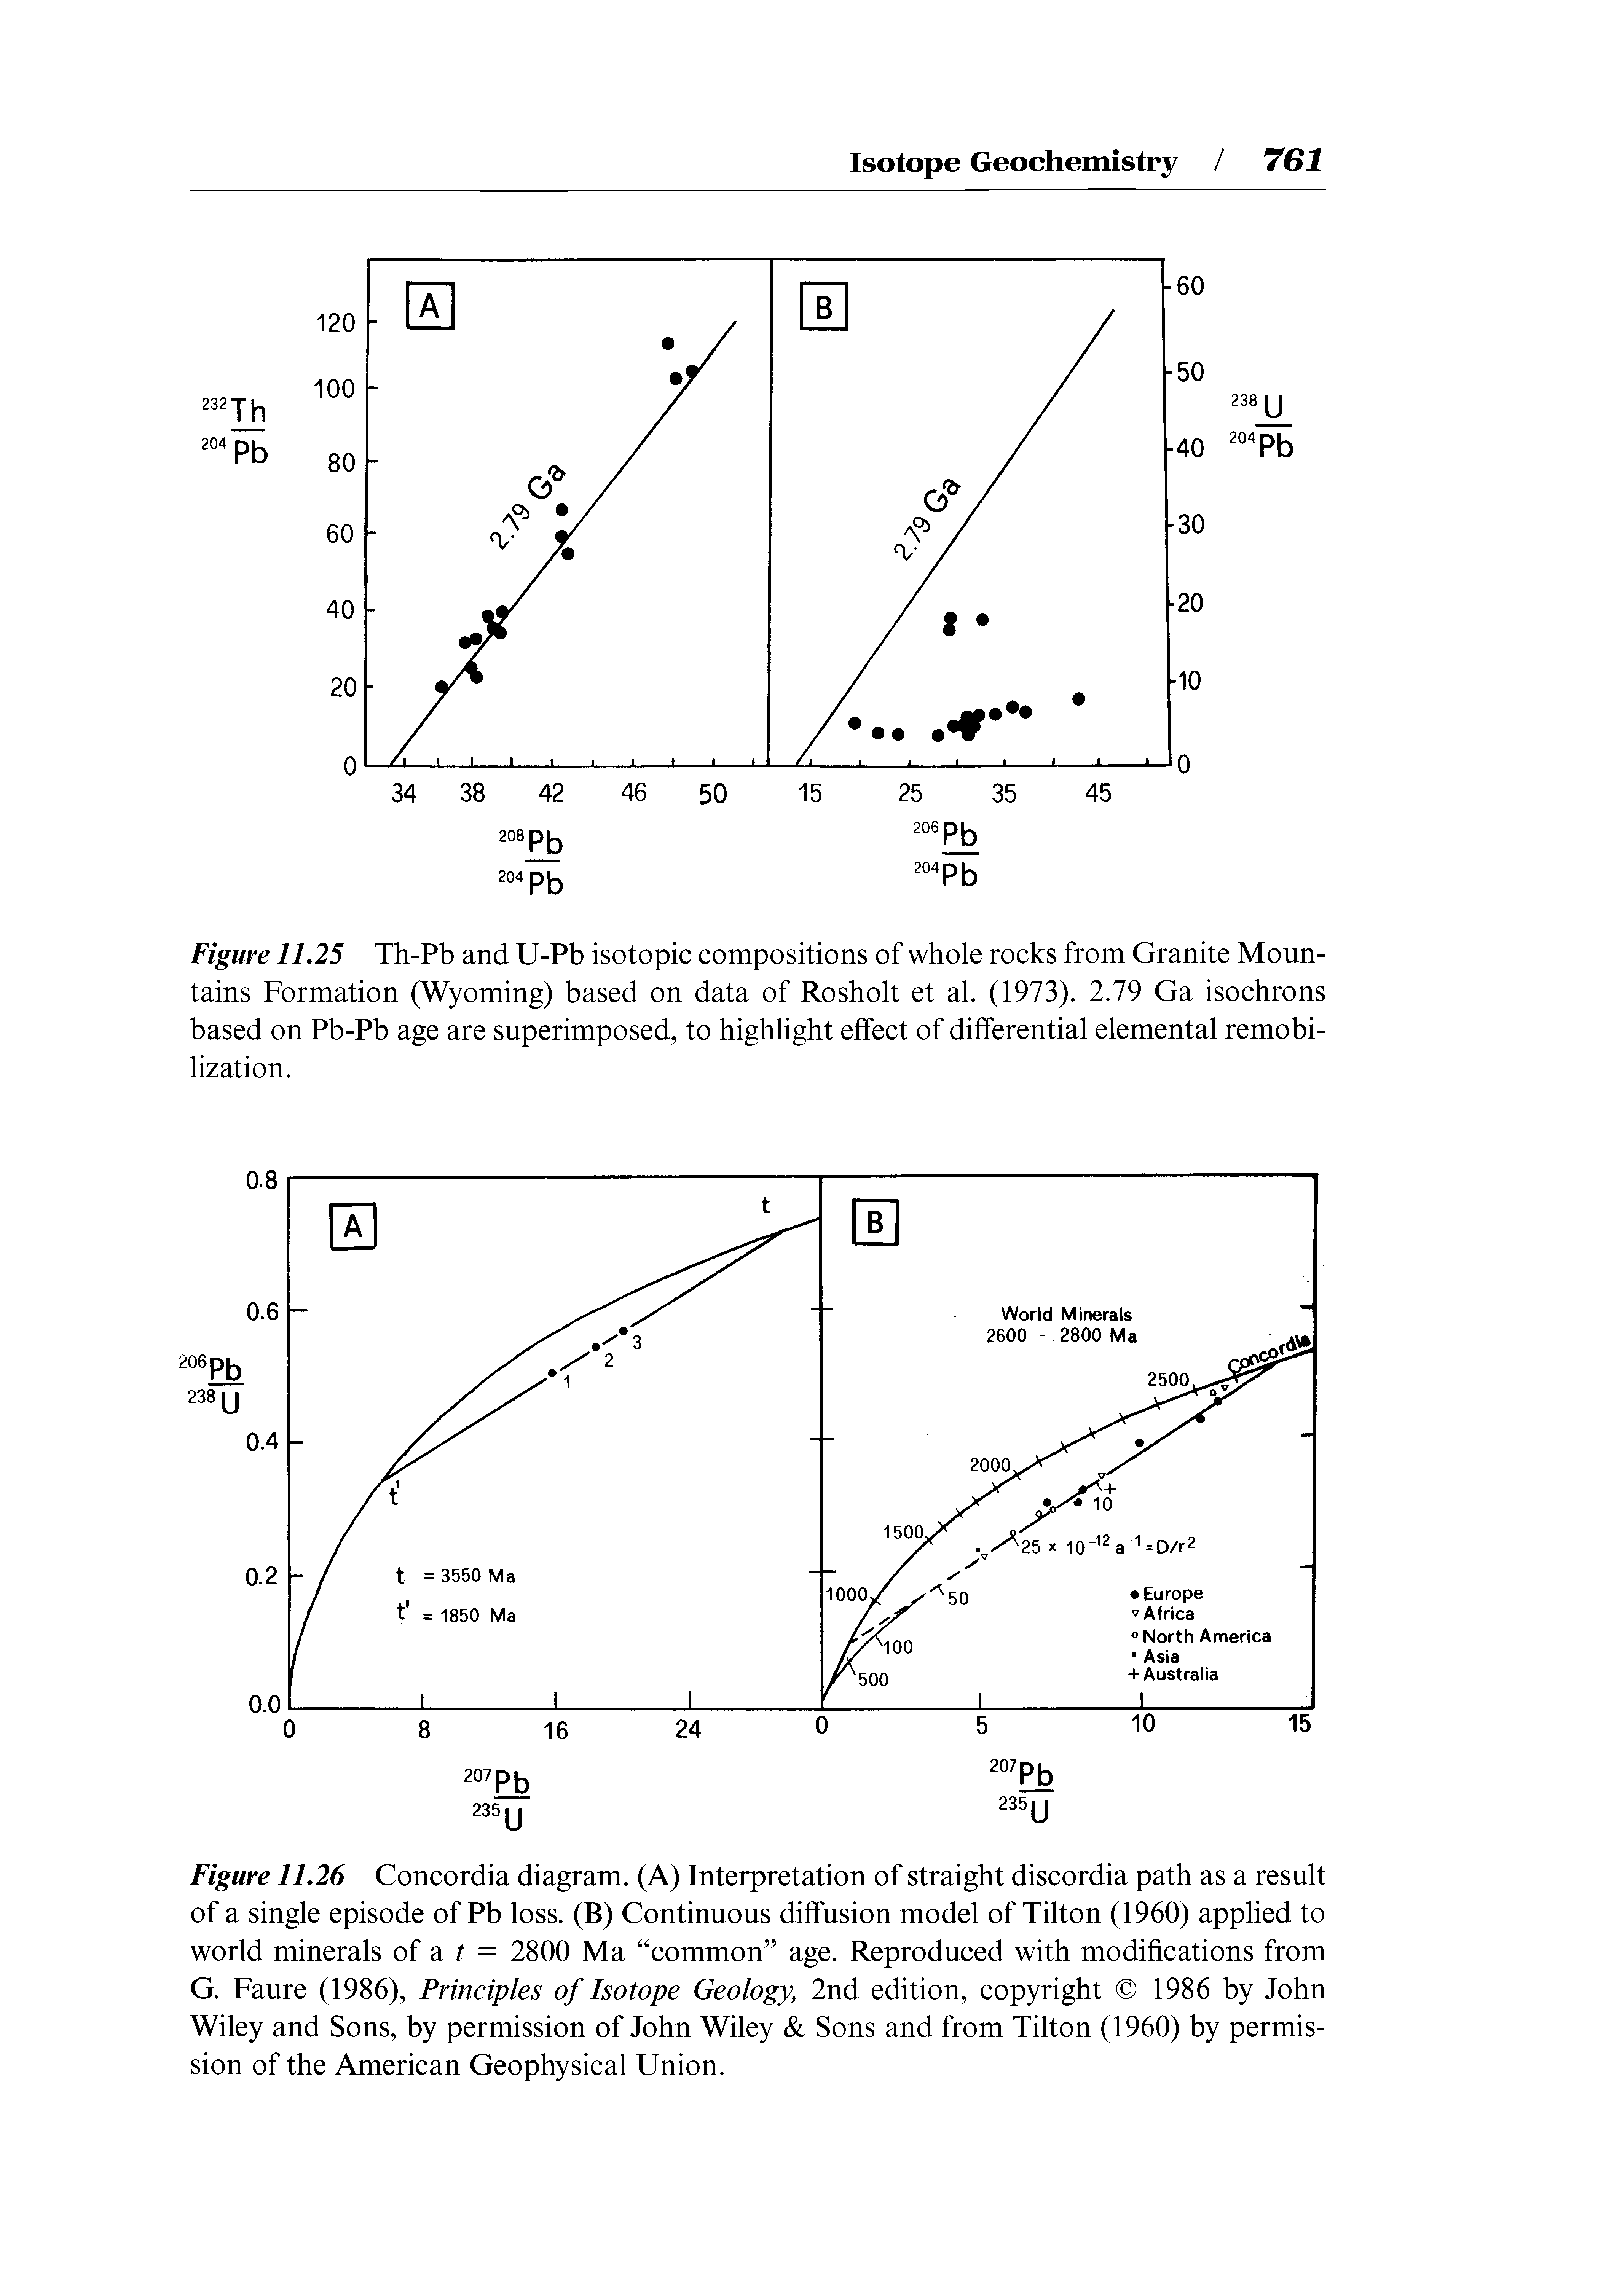 Figure 11,26 Concordia diagram. (A) Interpretation of straight discordia path as a result of a single episode of Pb loss. (B) Continuous diffusion model of Tilton (1960) applied to world minerals of a = 2800 Ma common age. Reproduced with modifications from G. Faure (1986), Principles of Isotope Geology, 2nd edition, copyright 1986 by John Wiley and Sons, by permission of John Wiley Sons and from Tilton (1960) by permission of the American Geophysical Union.